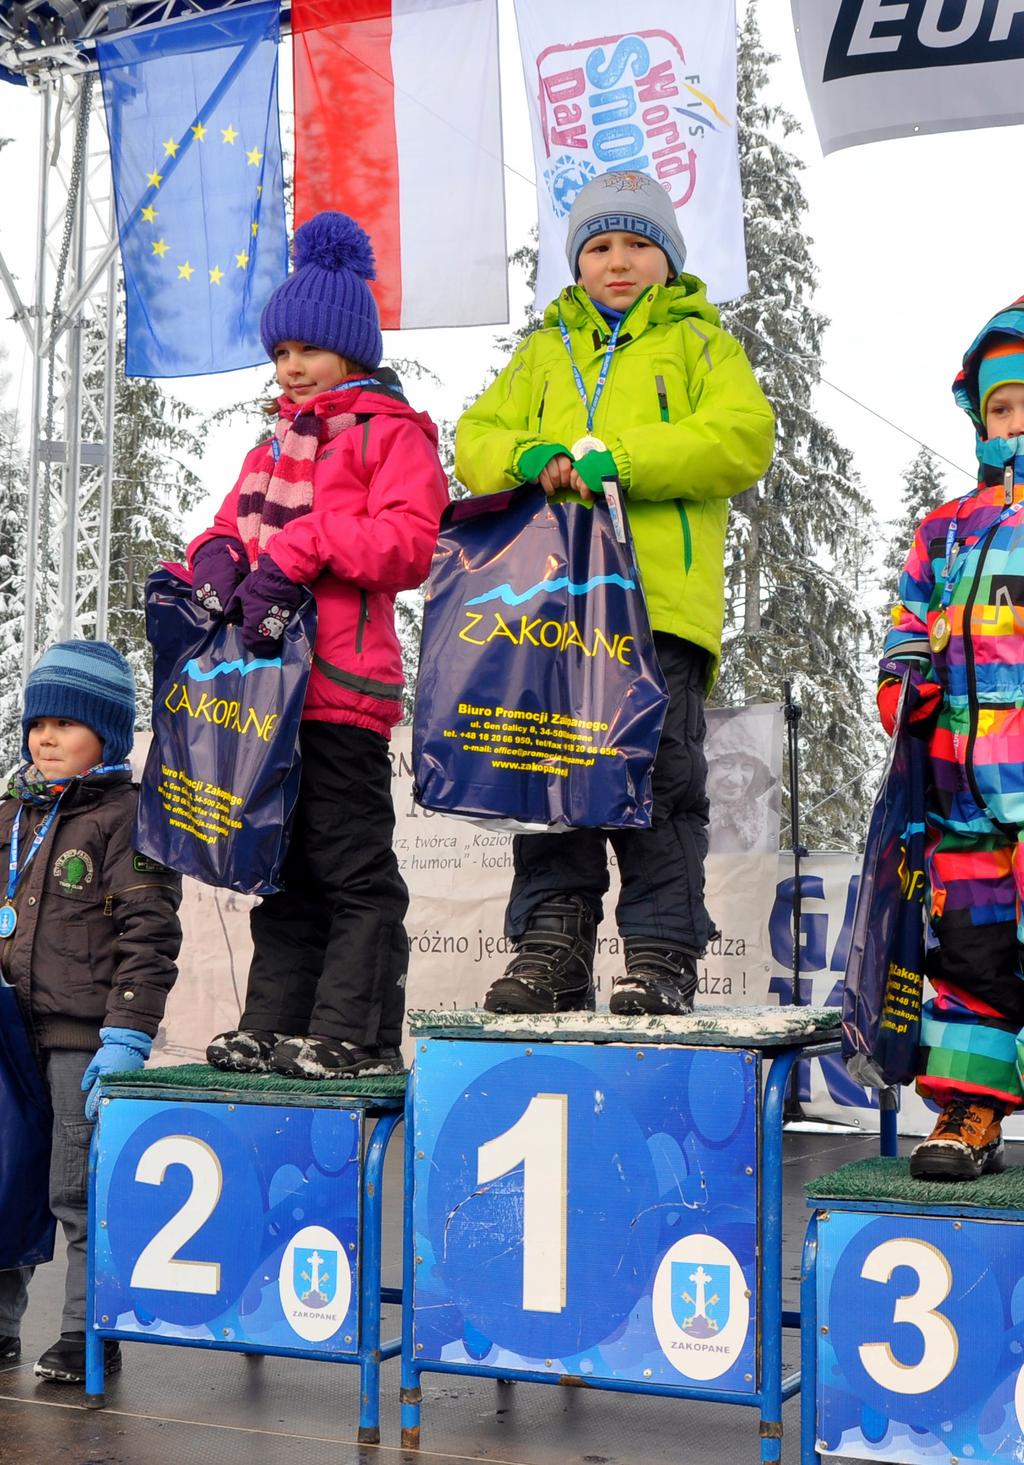 Engagement of Schools: Local schools are very important to Zakopane World Snow Day. Zakopane are proactive with schools and establish a small drawing and creative arts competitions to engage children.